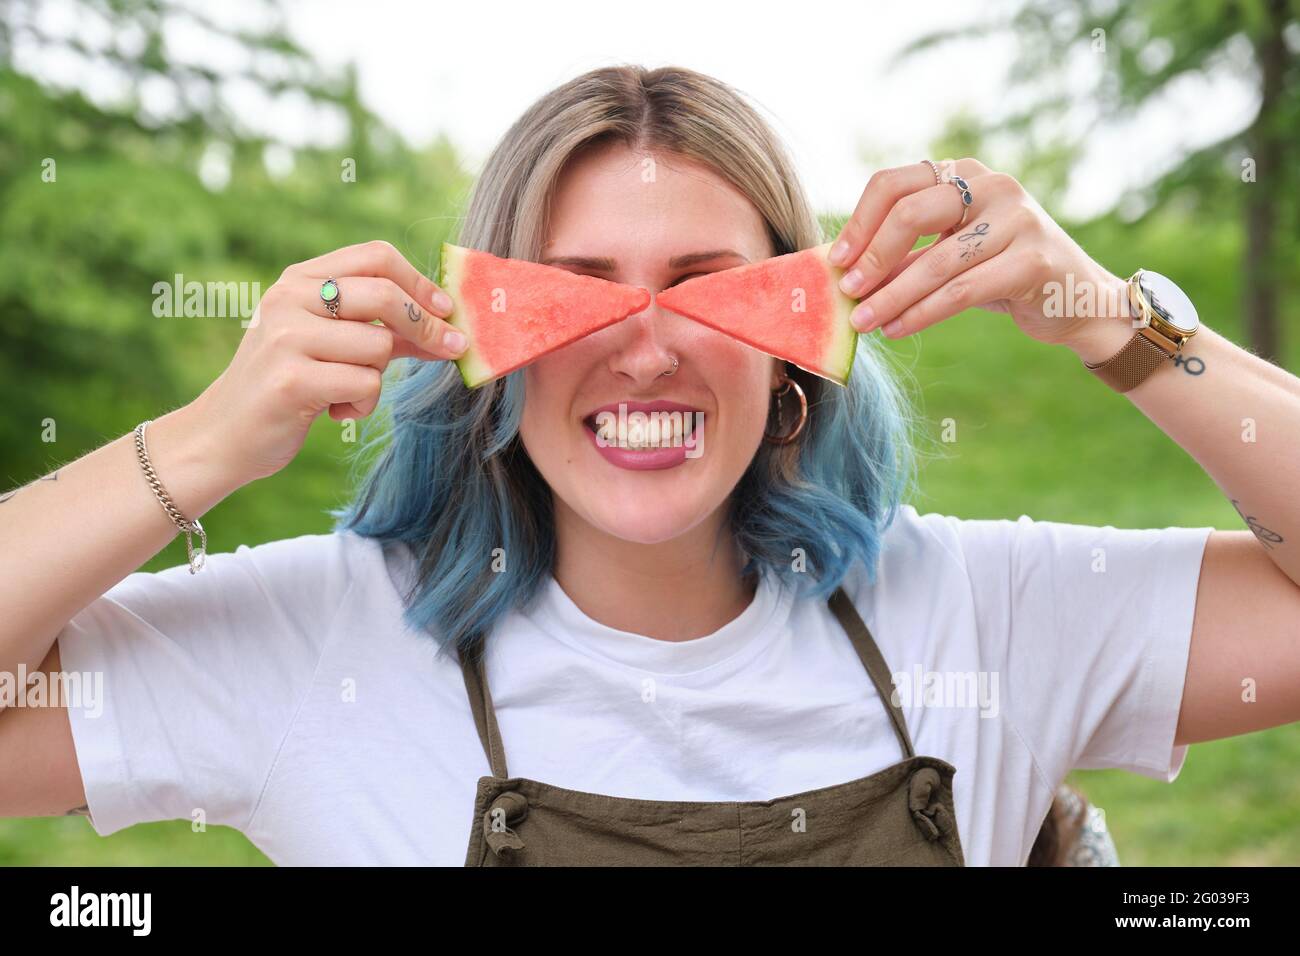 Young happy woman with watermelon slices on her eyes, having fun in a park. Picnic on a sunny summer day. Stock Photo